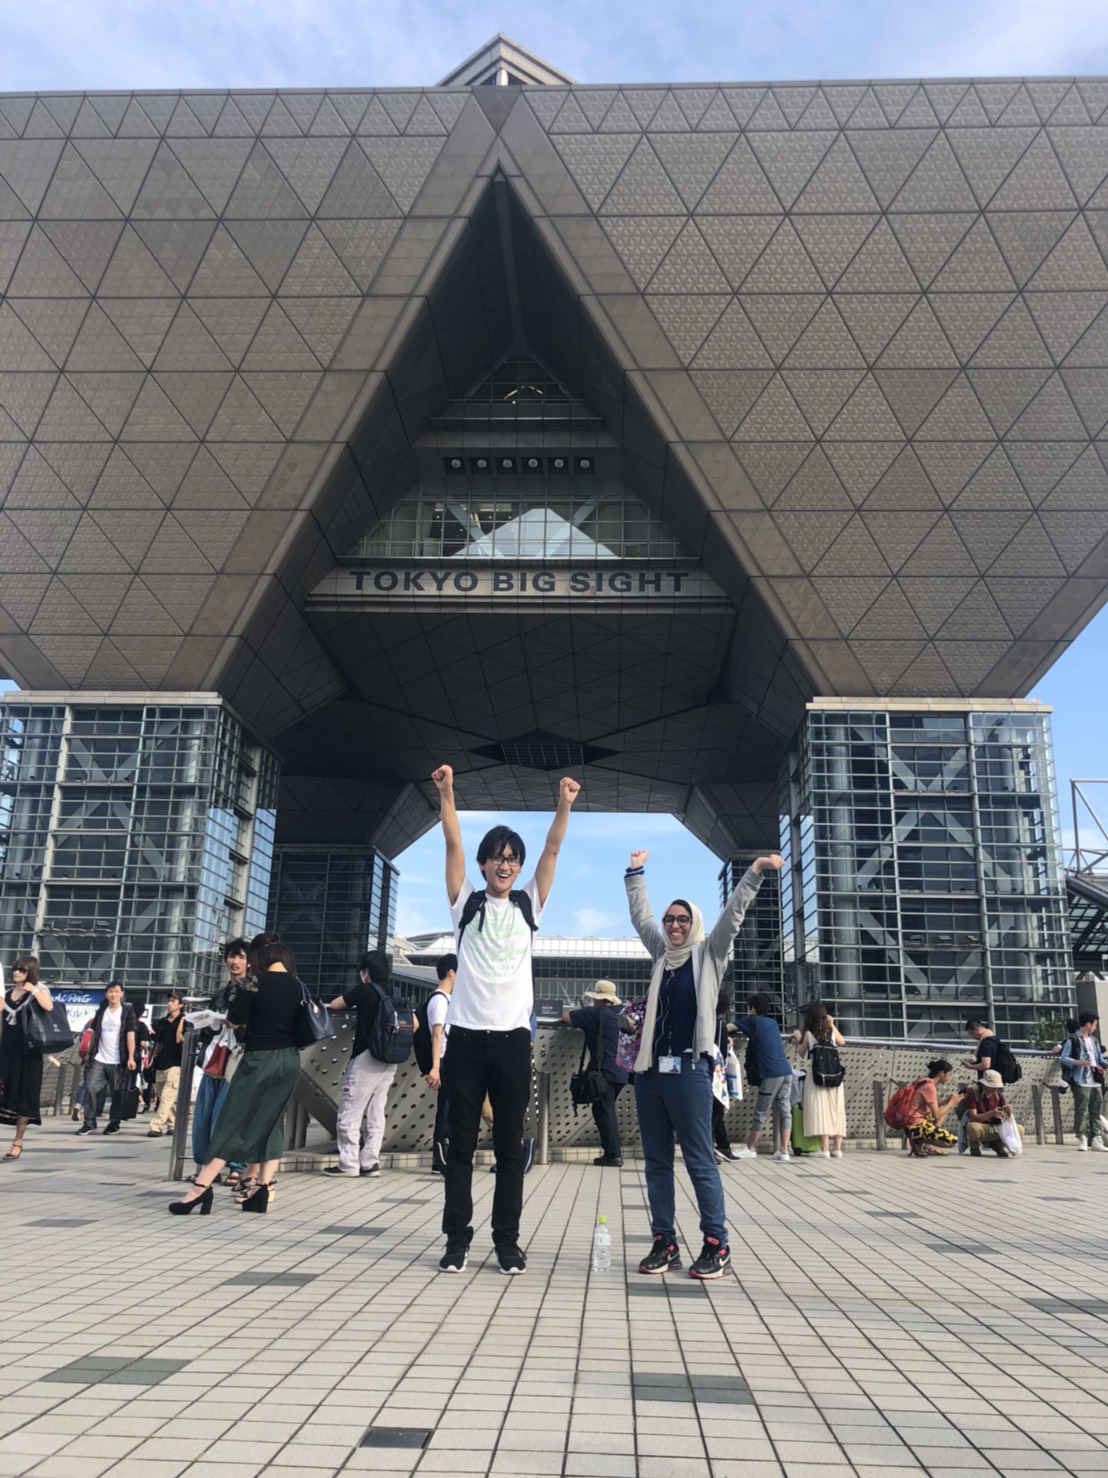 Marwa AlAlawi standing beside her supervisor Ken-san in front Tokyo Big Sight in Odaiba, two inverted pyramids suspended over a plaza.